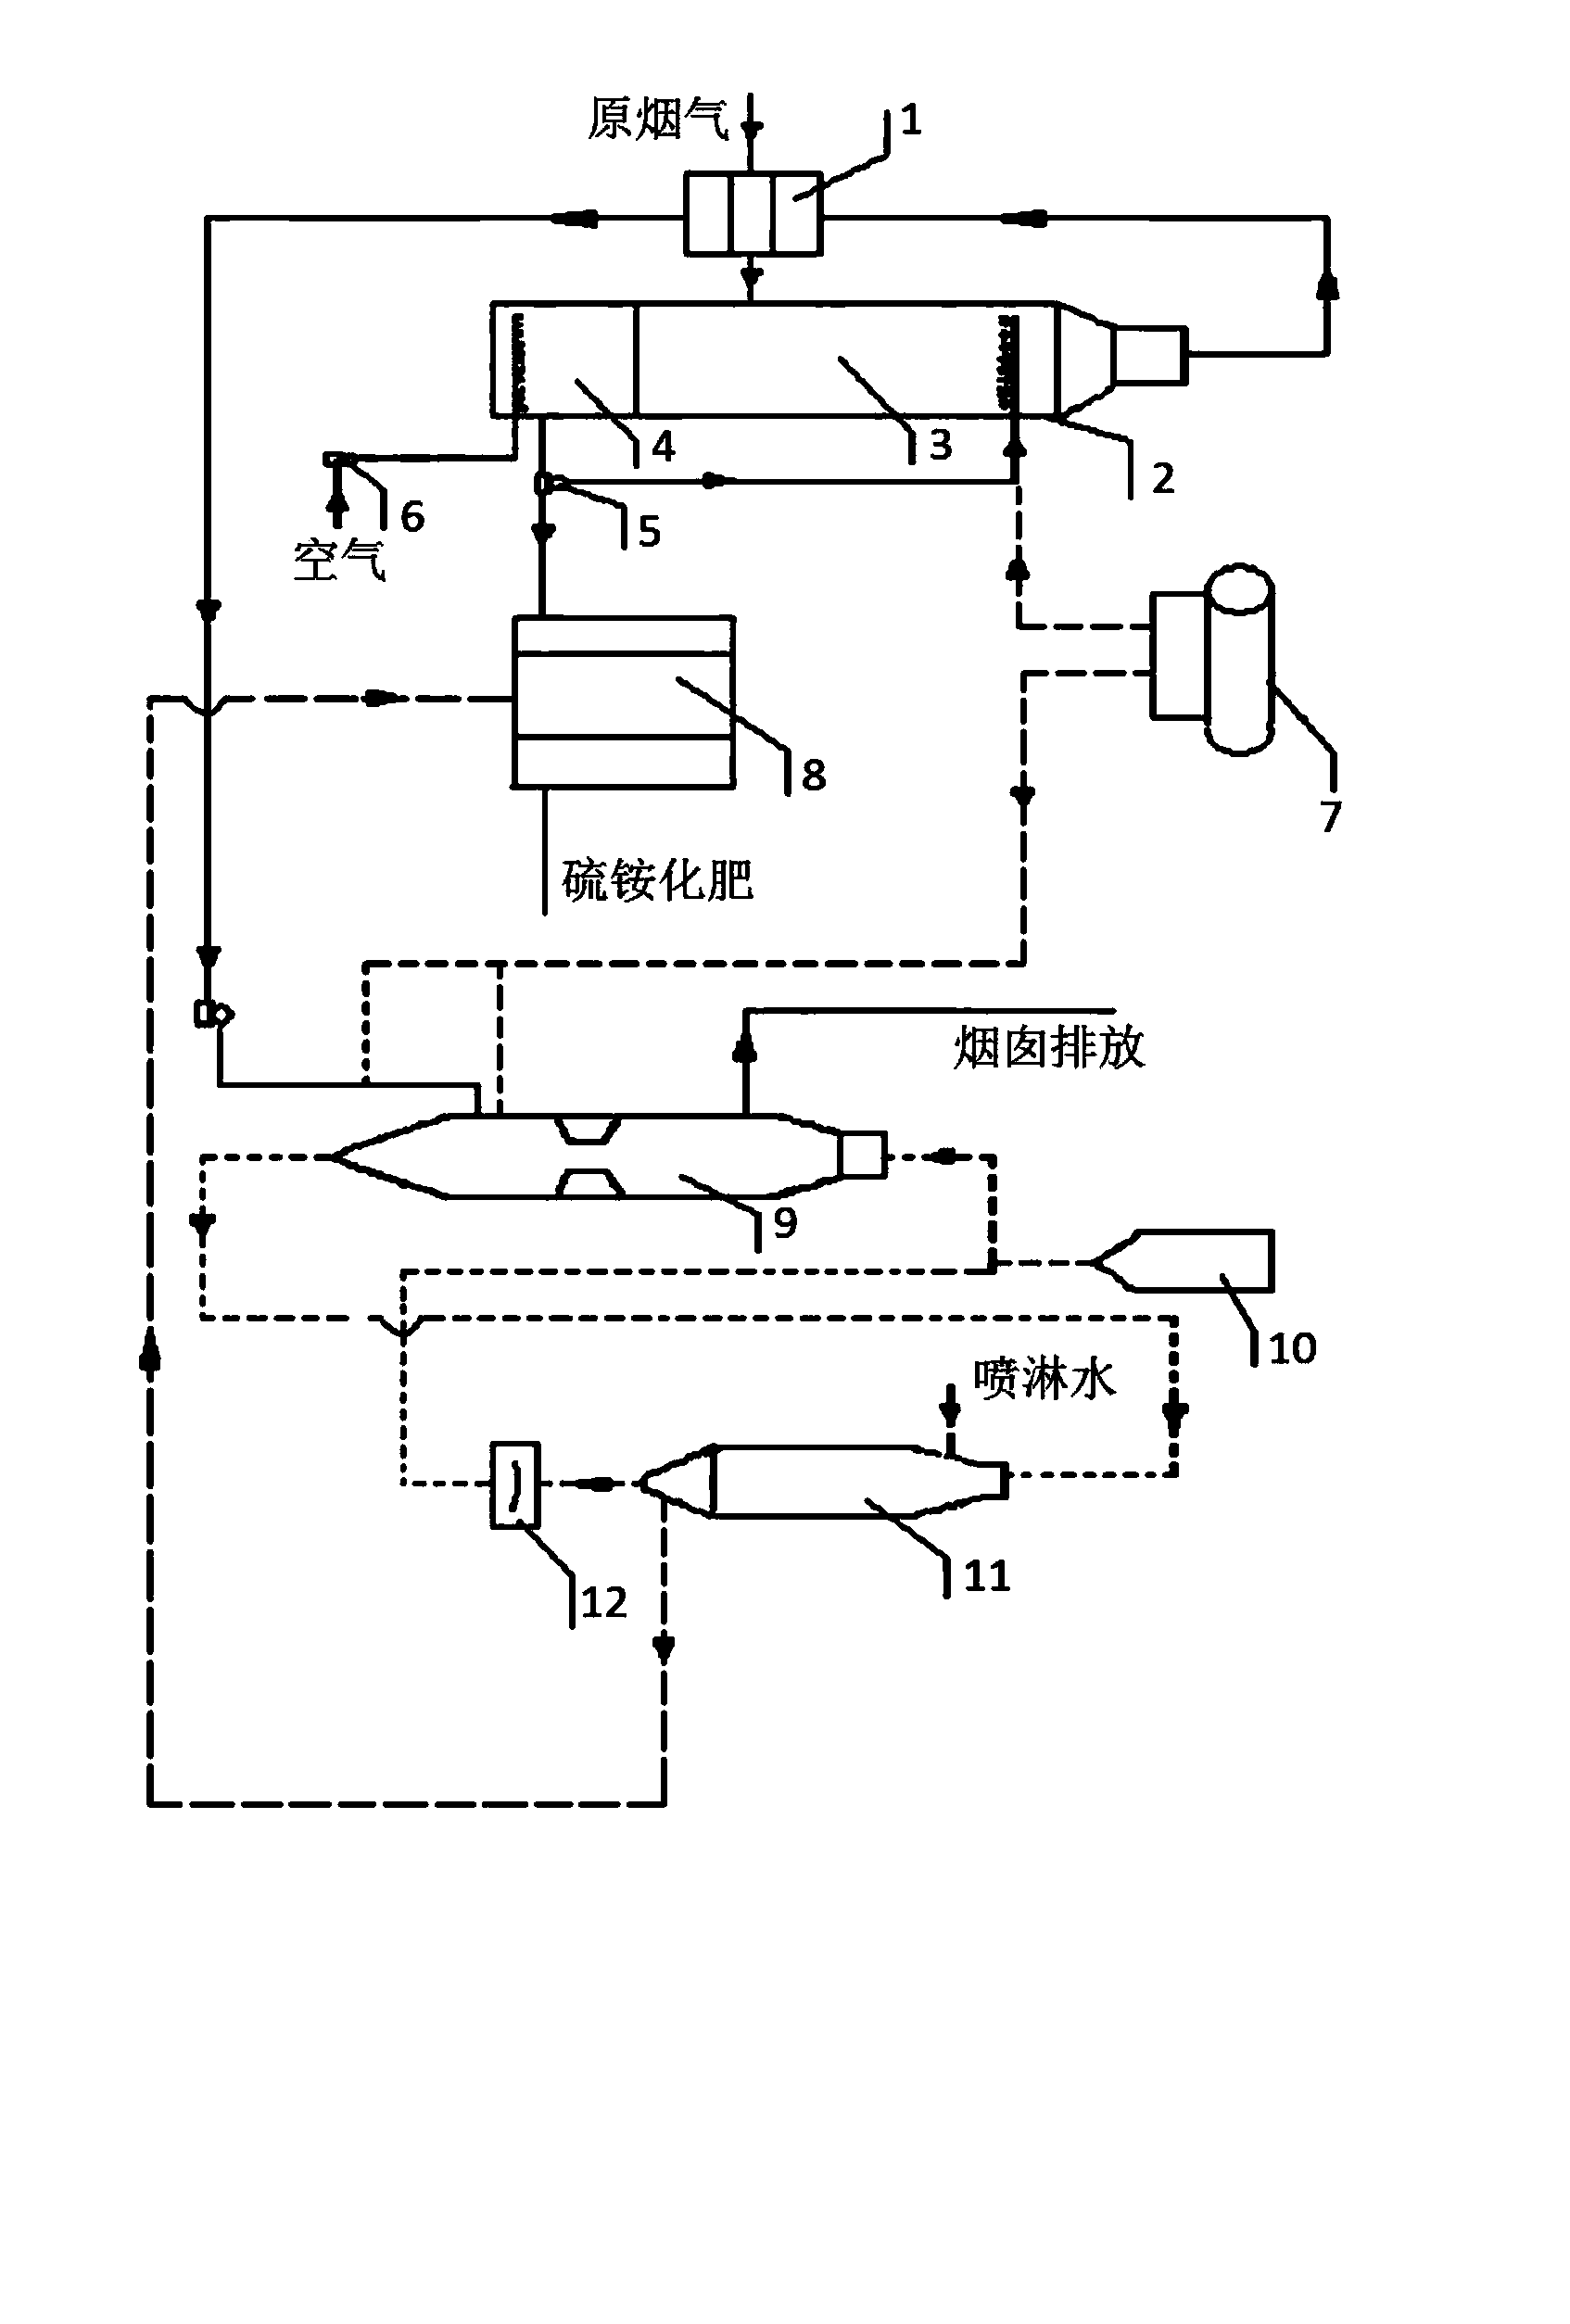 Method for simultaneously desulfurizing, denitrating and purifying flue gas